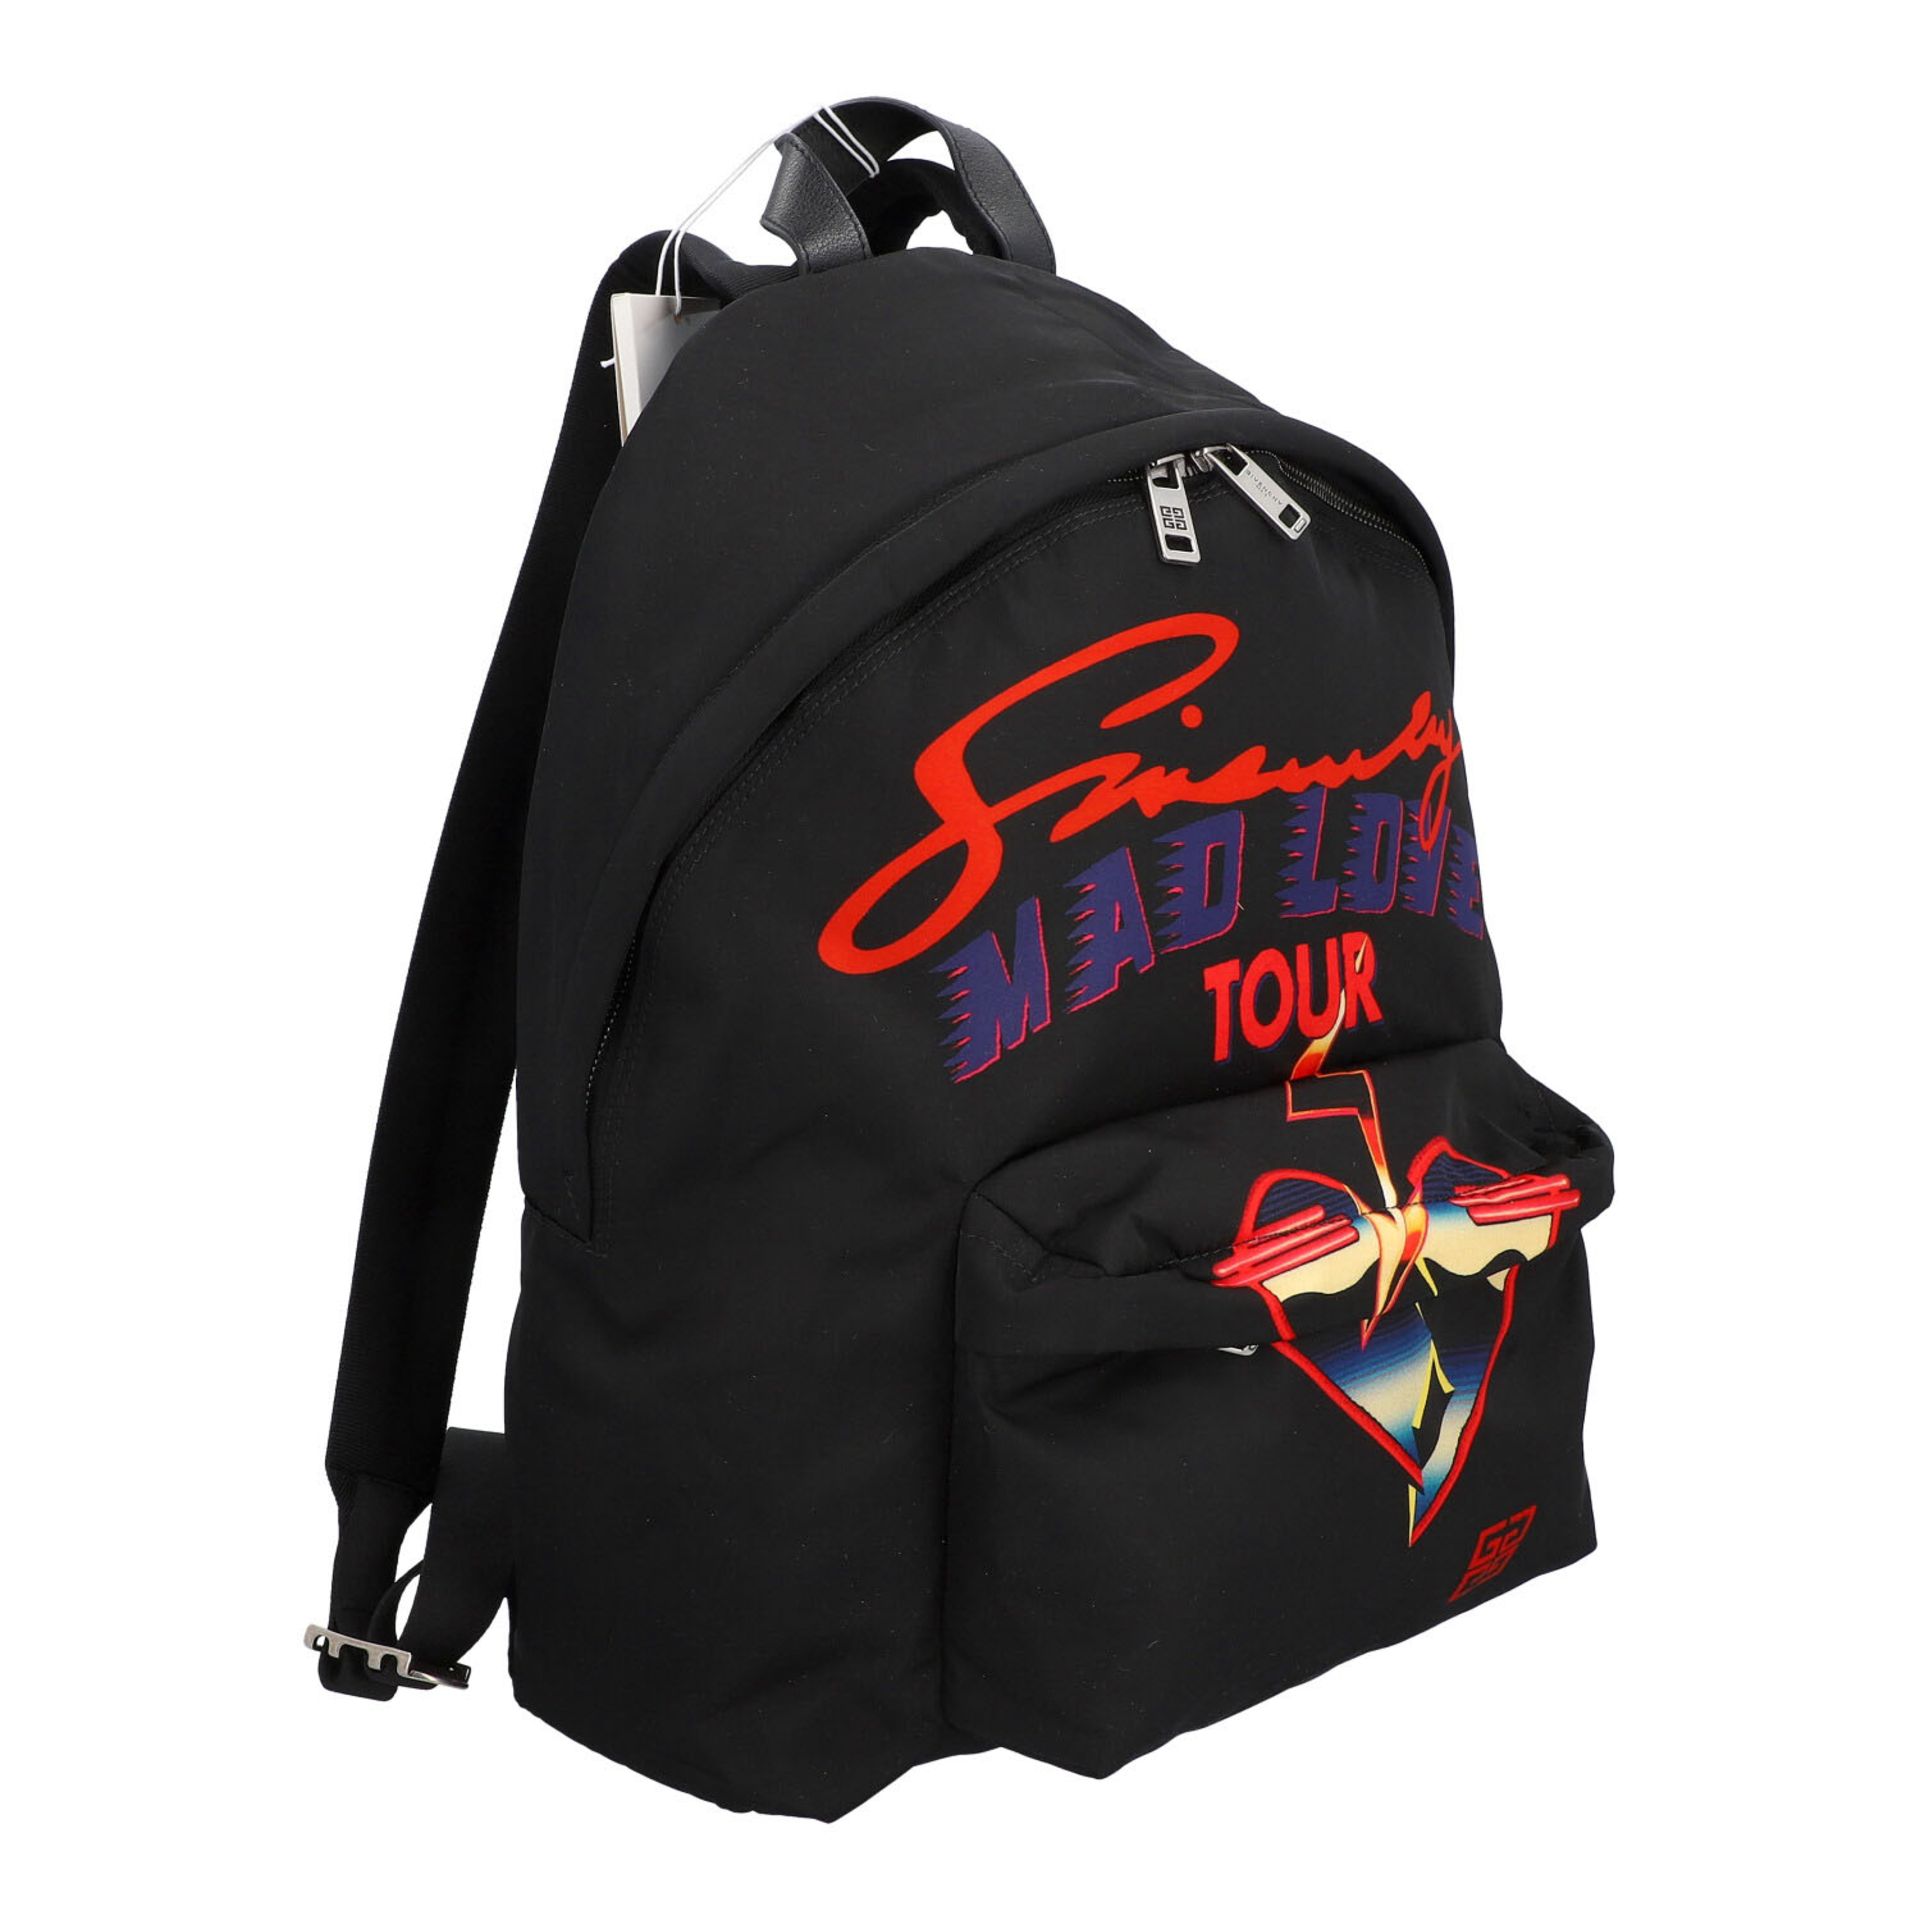 GIVENCHY Rucksack "MAD LOVE TOUR". - Image 2 of 8